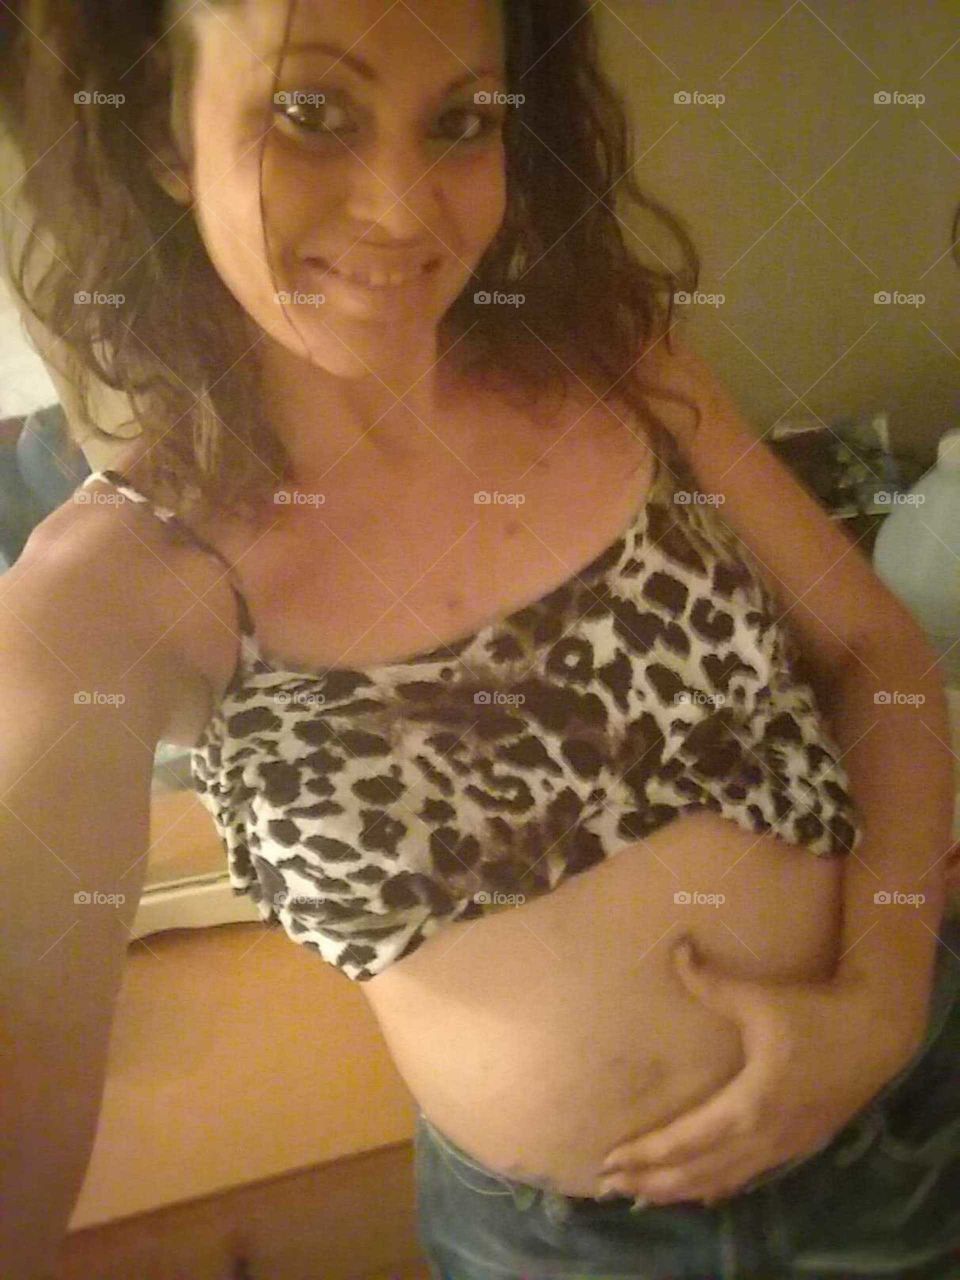 7 mo. pregnant with baby damien